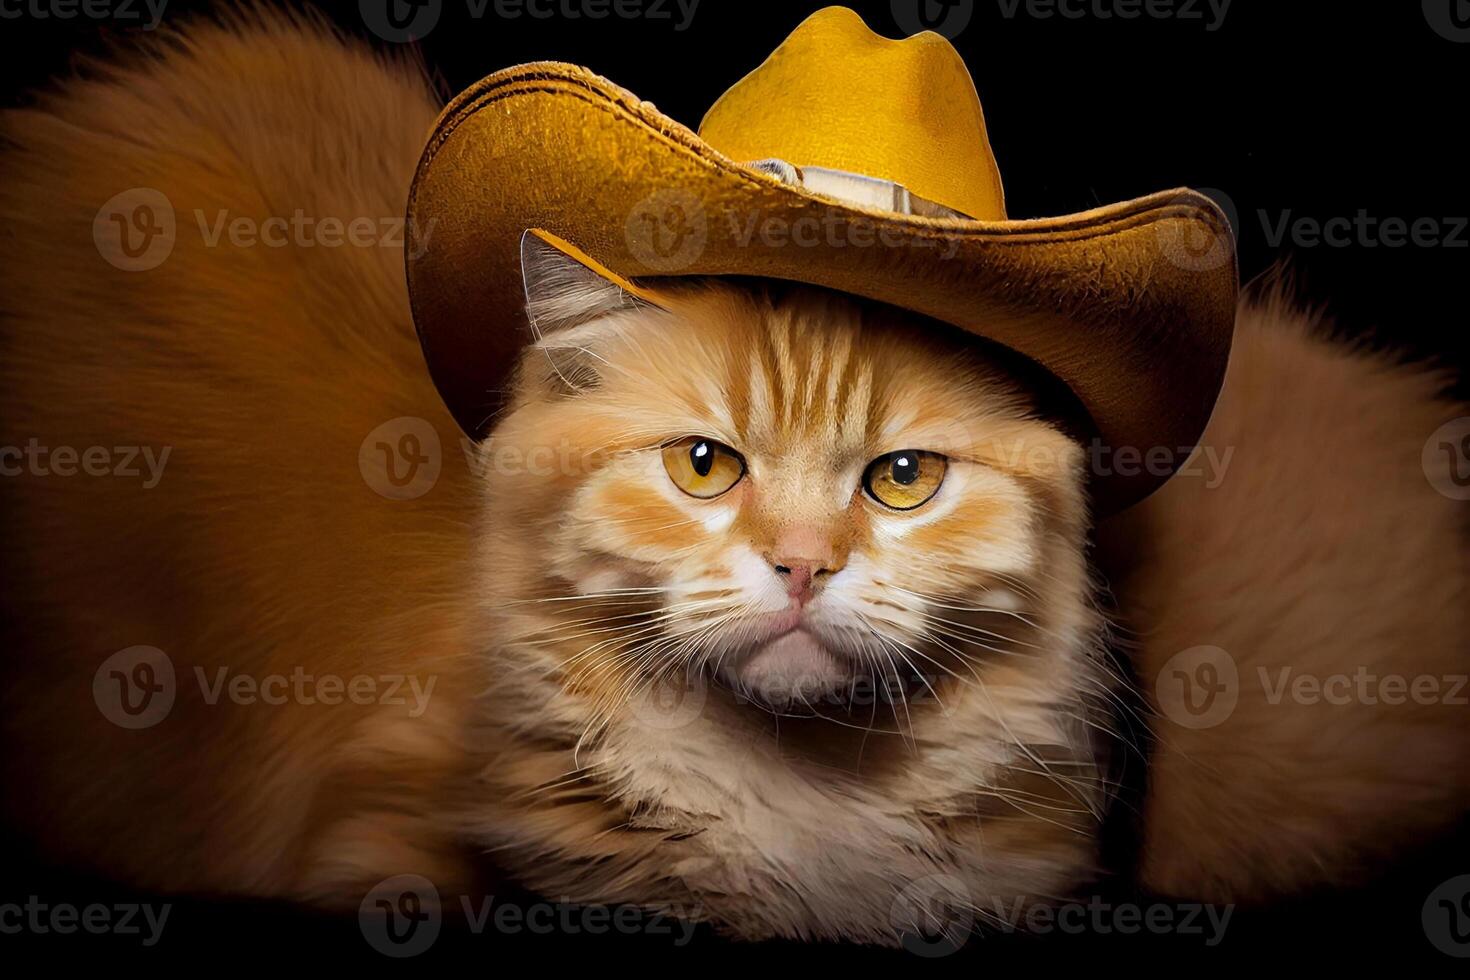 red cat in a yellow cowboy hat, funny cat illustration photo